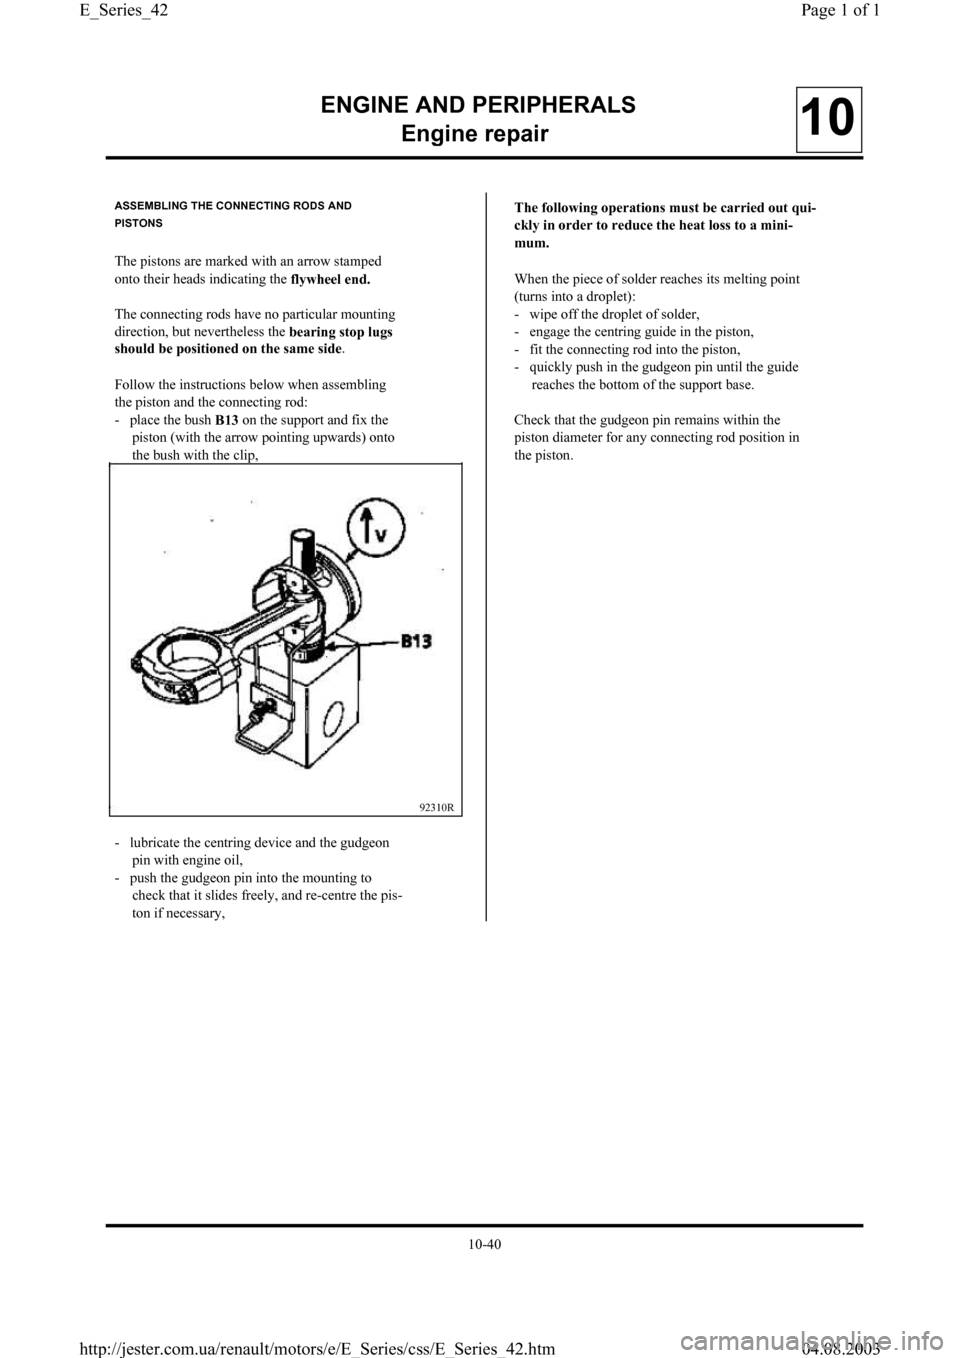 RENAULT CLIO 1997 X57 / 1.G Petrol Engines Workshop Manual ENGINE AND PERIPHERALS
En
gine repair10
ASSEMBLING THE CONNECTING RODS AND
PISTONS
The pistons are marked with an arrow stamped
onto their heads indicating the 
flywheel end.
The connecting rods have 